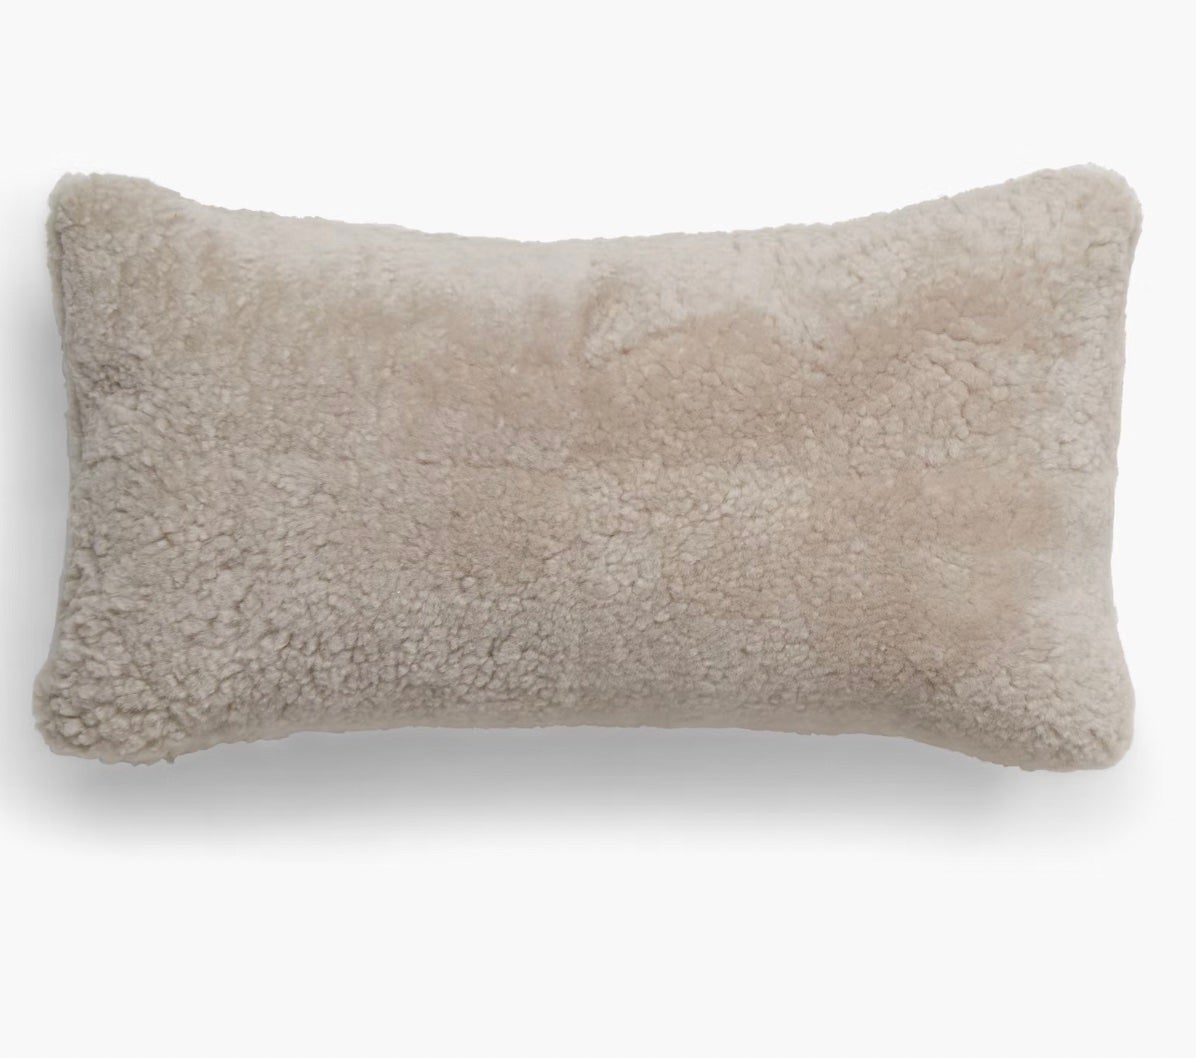 When It Comes to Sofa Pillows, Most People Say This Amount Is the Sweet Spot